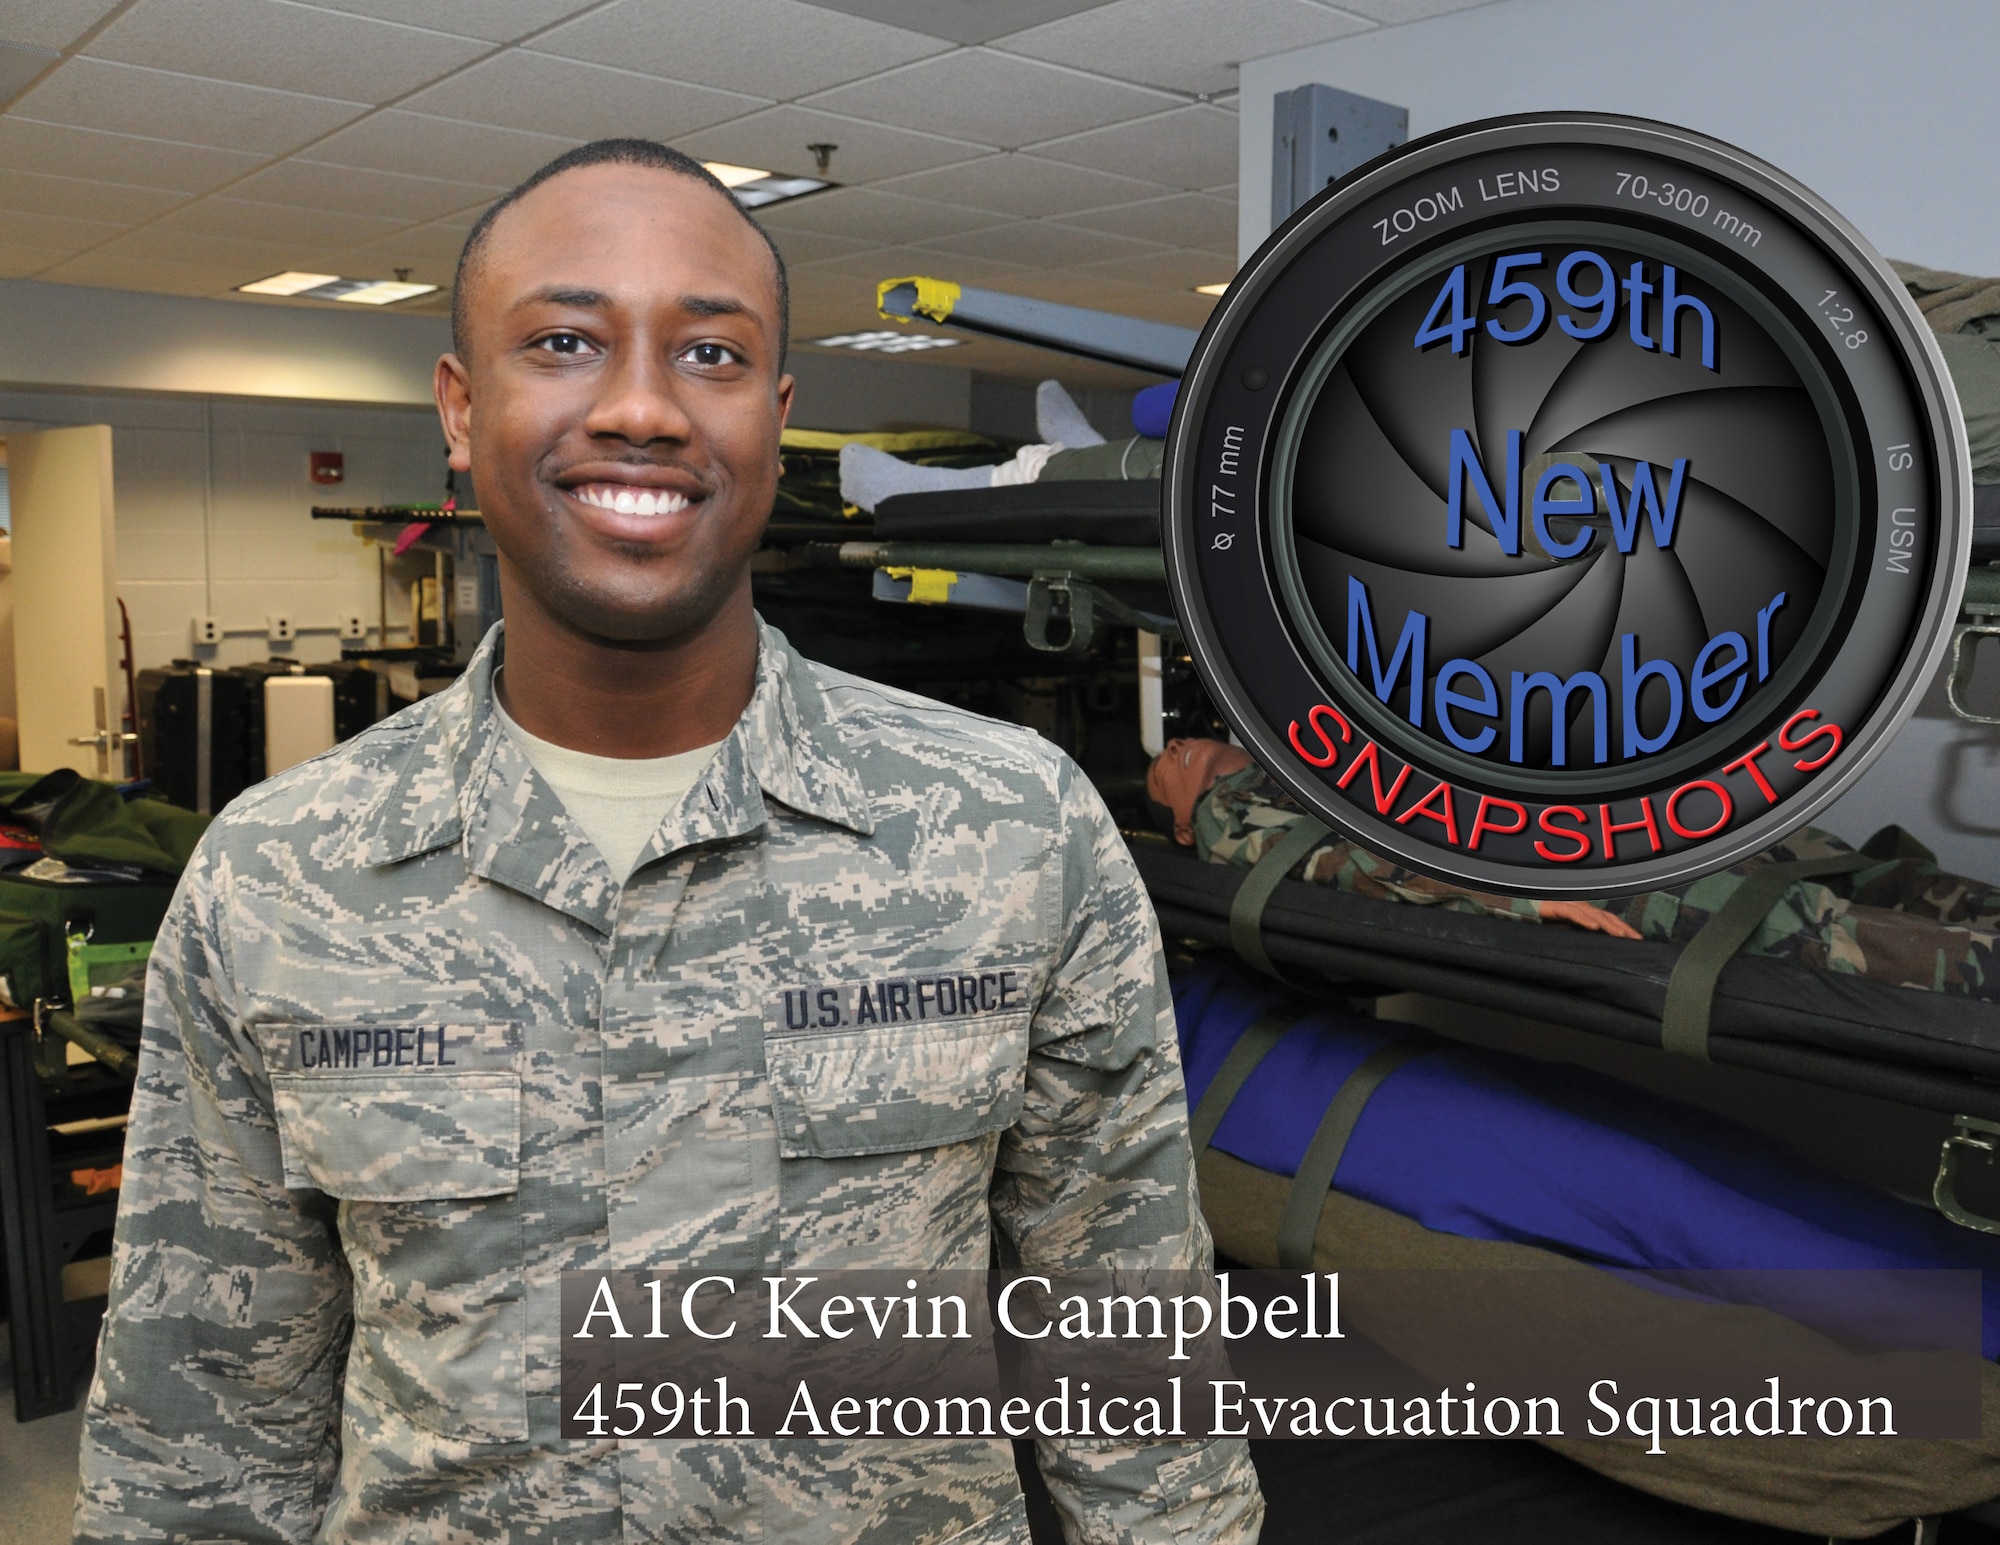 Airman First Class Kevin Campbell, Air Evacuation Technician, 459th Aeromedical Evacuation Squadron poses for a photo at Joint Base Andrews, Md., March 7, 2015.  A1C Campbell is the 459th Air Refueling Wing's New Member Snapshot for the month of March.  (U.S. Air Force Photo/ Tech. Sgt. Brent A. Skeen)